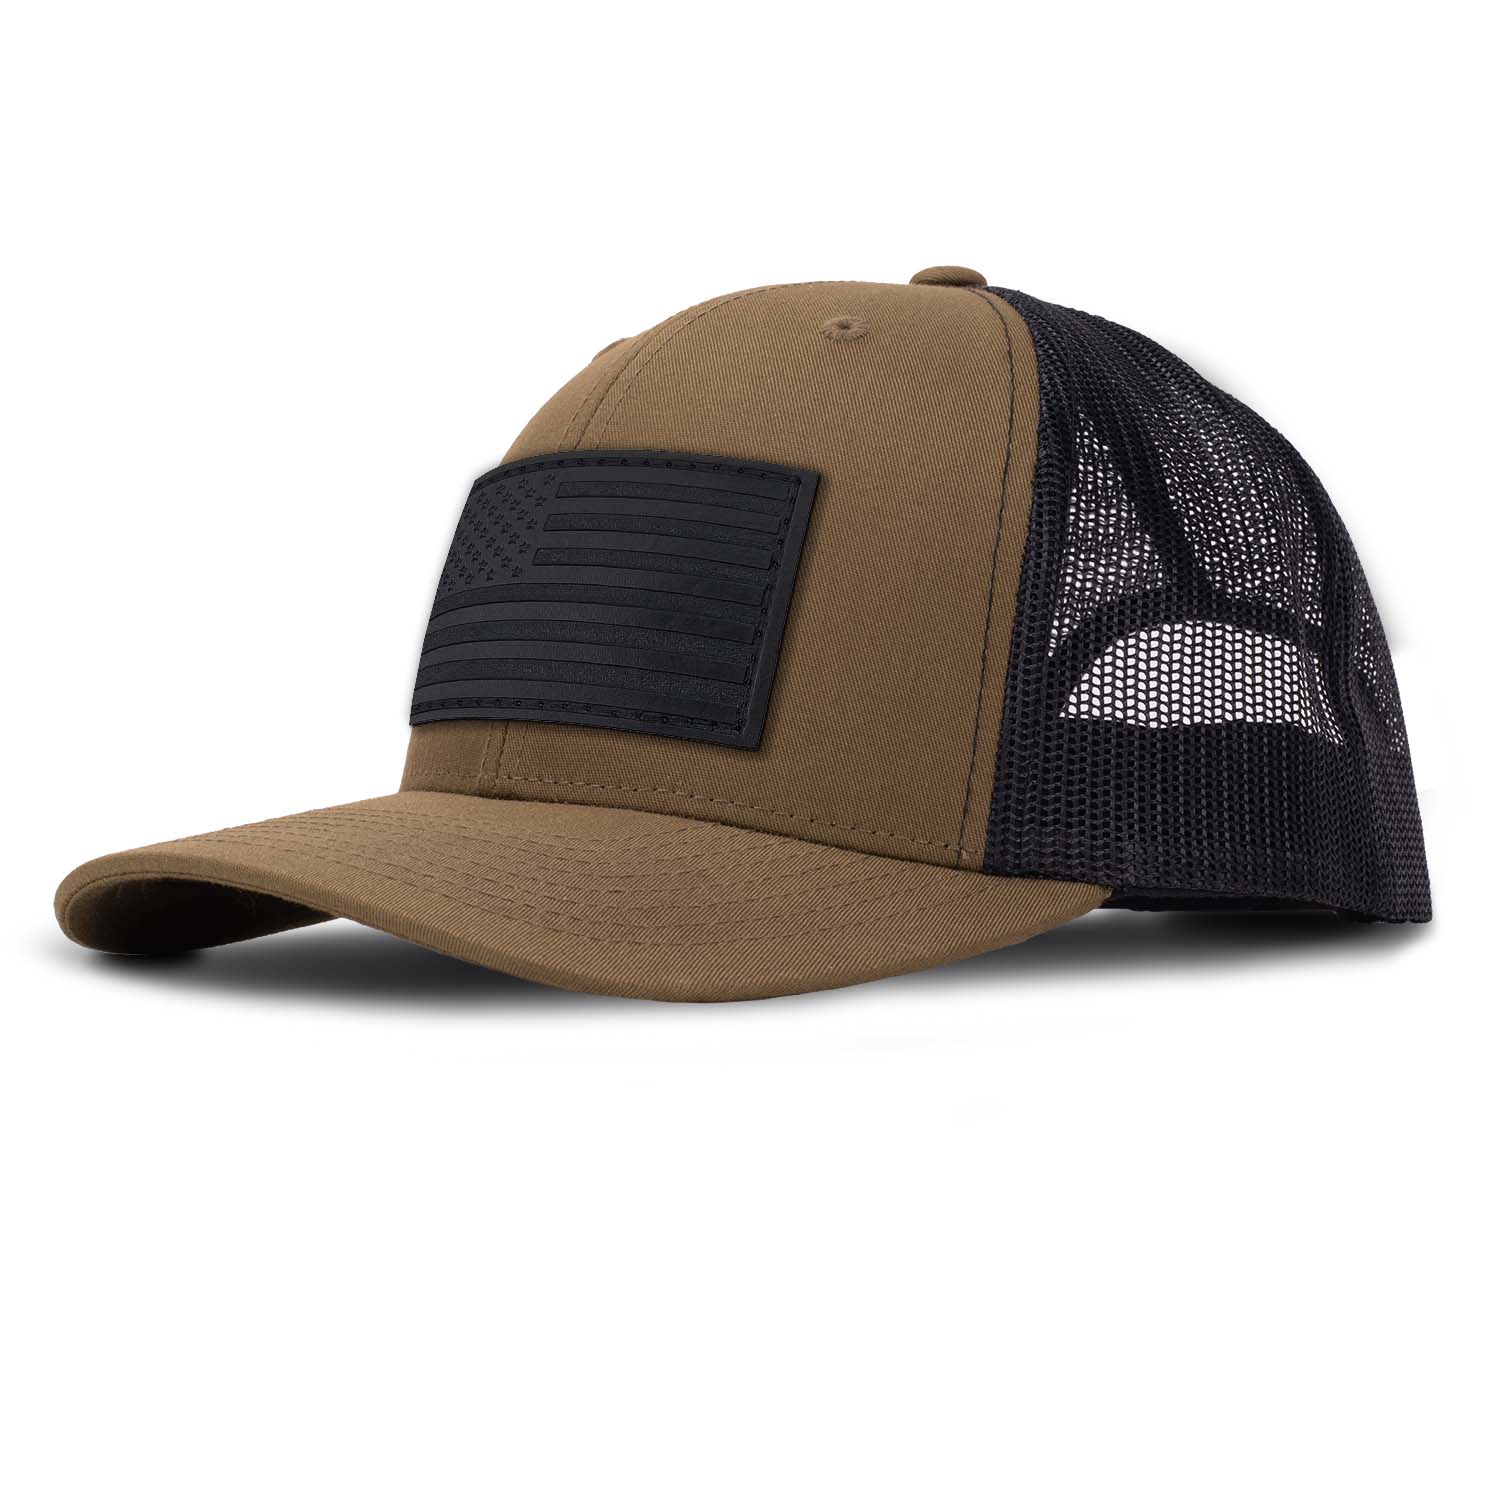 Revolution Mfg full grain black leather American Flag patch on a coyote brown with black mesh classic mid-profile, curved bill trucker hat